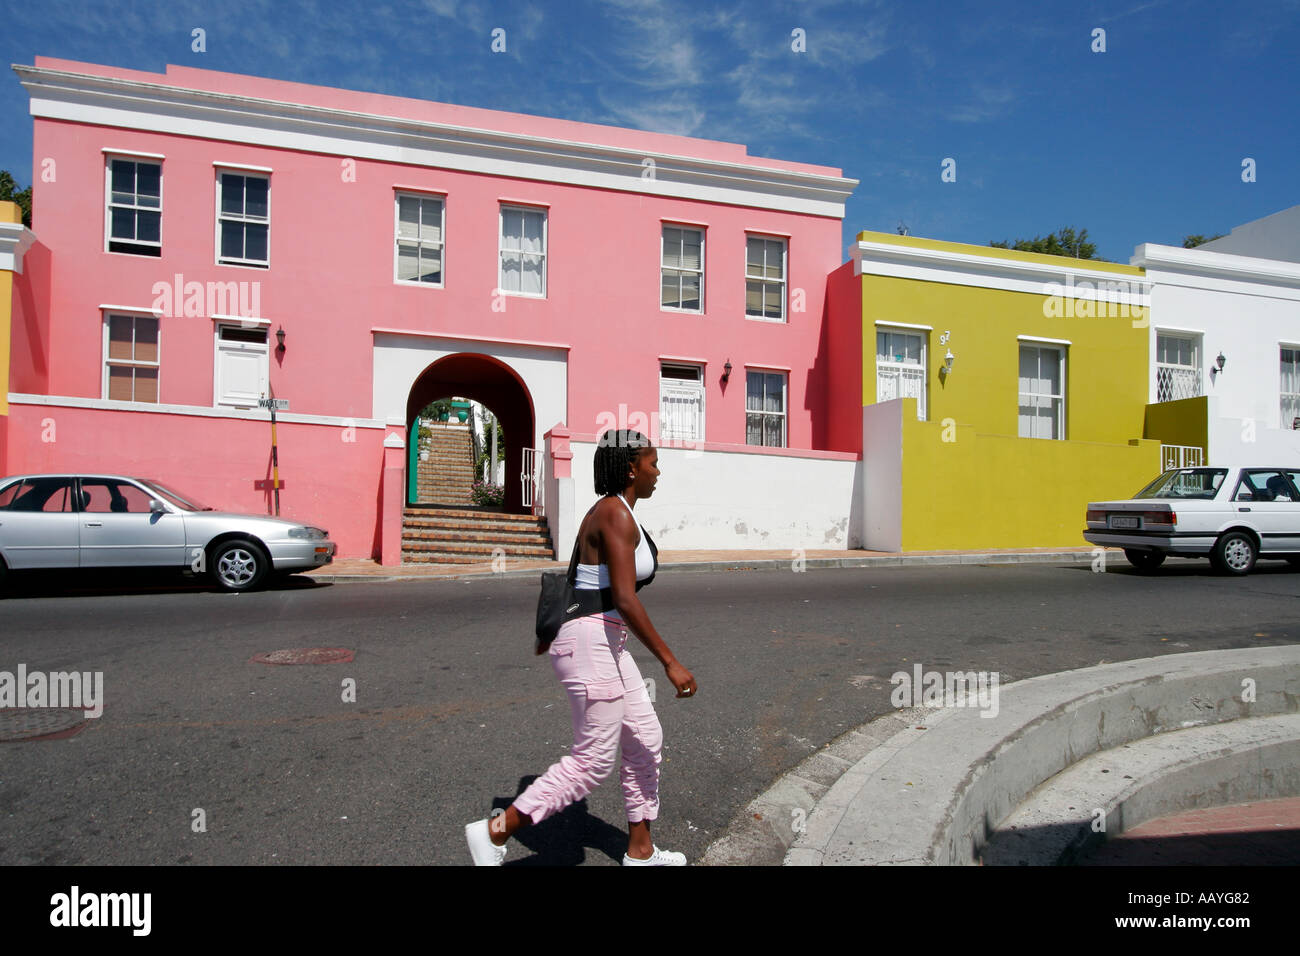 cape town Bo Kaap colorful facades in area of cape muslims black girl Stock Photo